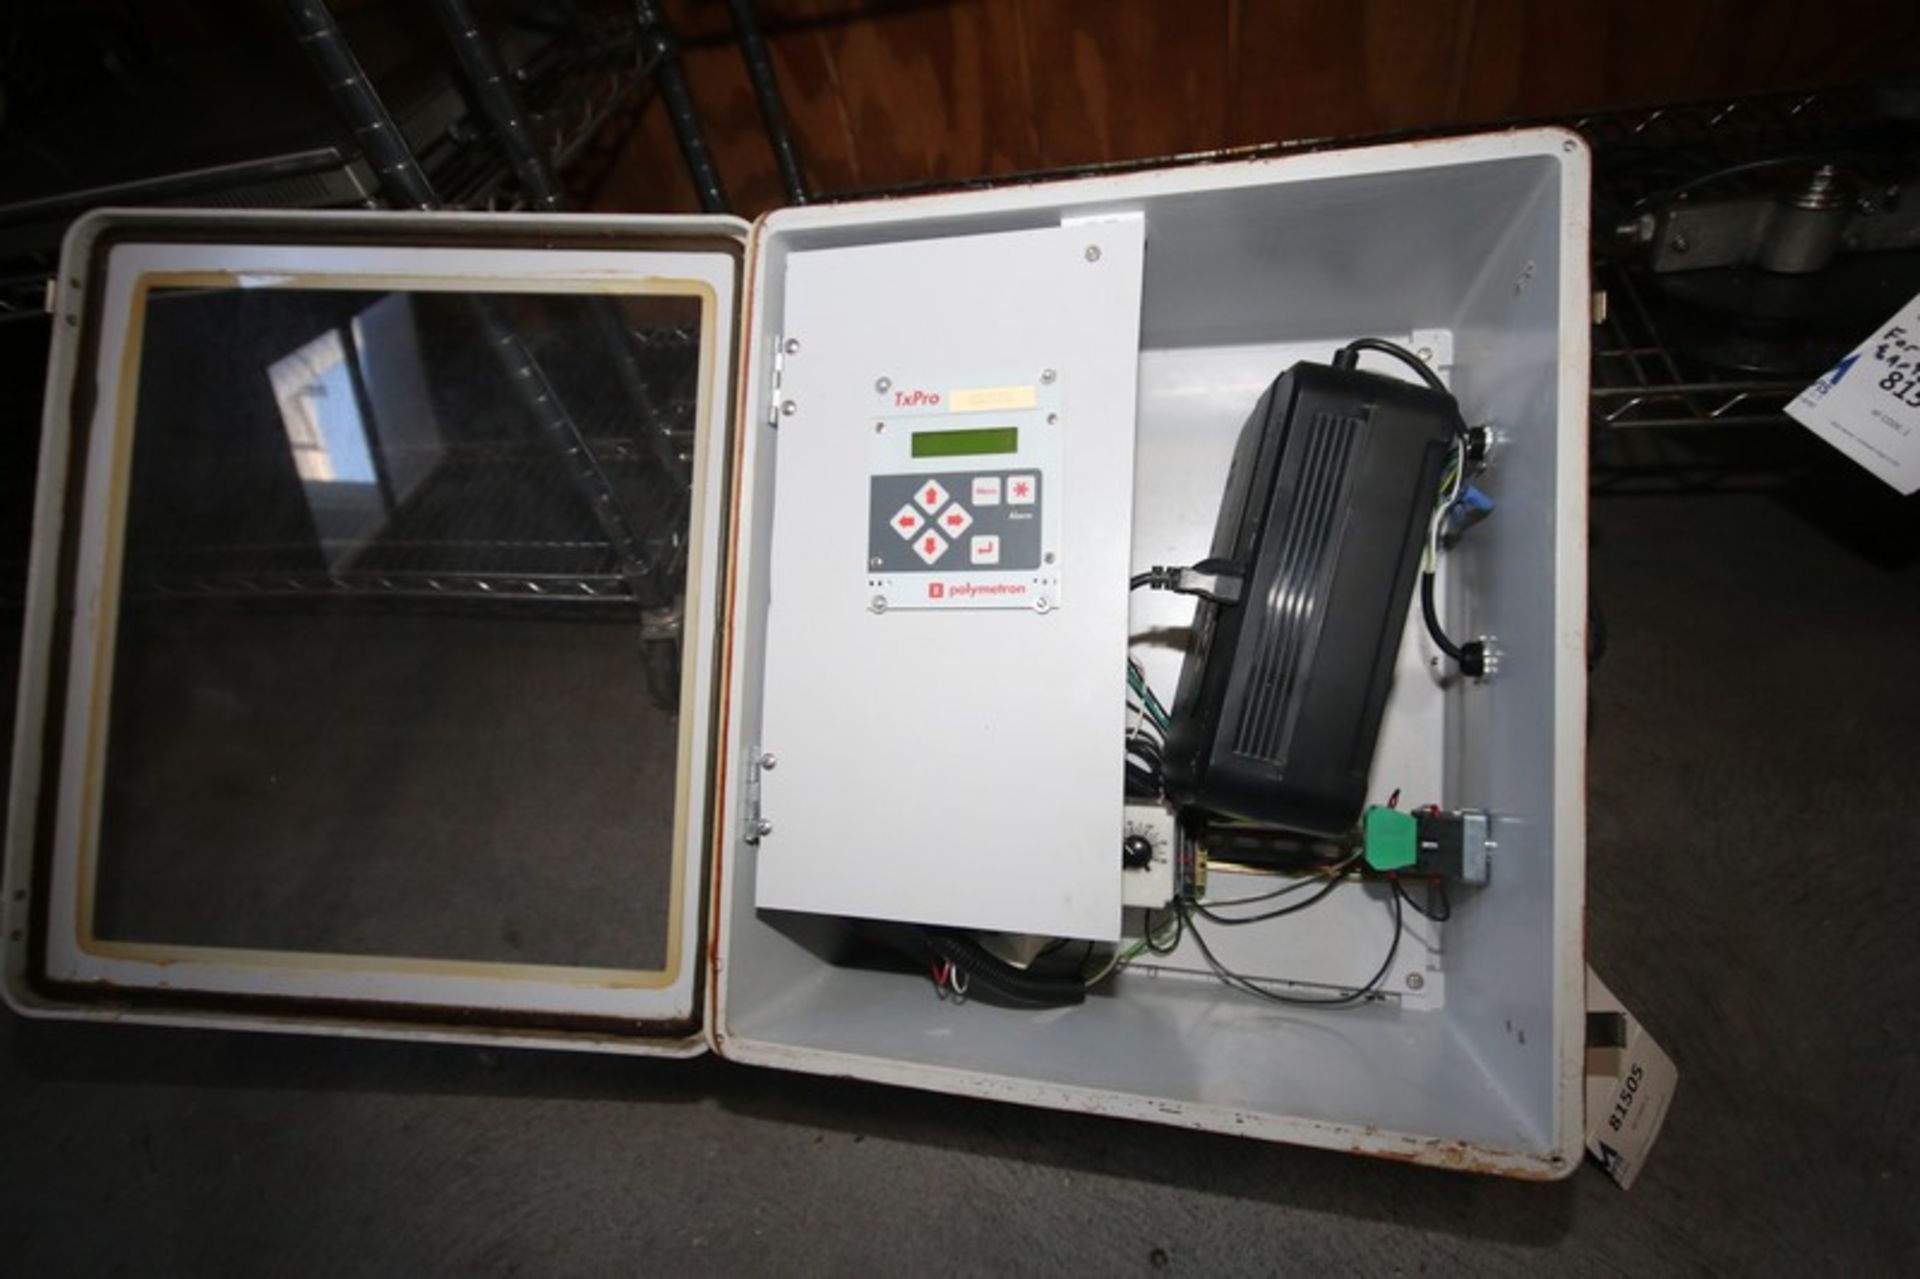 BTG Polymetron Model TxPro-S Control Box (INV#81505)(Located @ the MDG Auction Showroom in Pgh.,